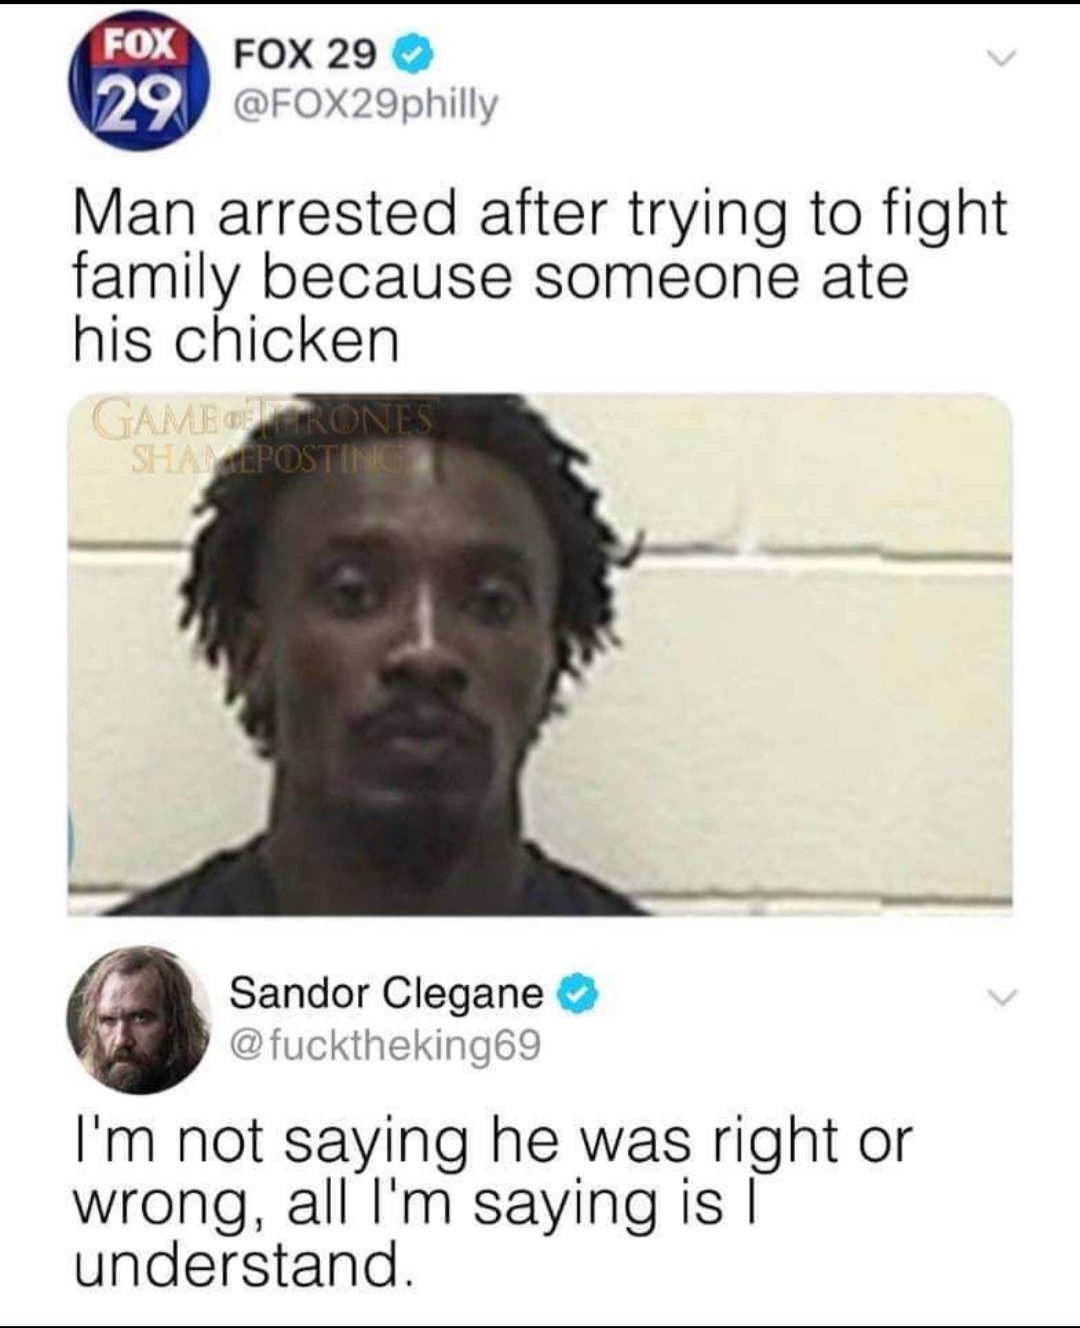 i m not saying it was memes - Fox Fox 29 Man arrested after trying to fight family because someone ate his chicken Game posting Sandor Clegane I'm not saying he was right or wrong, all I'm saying is | understand.